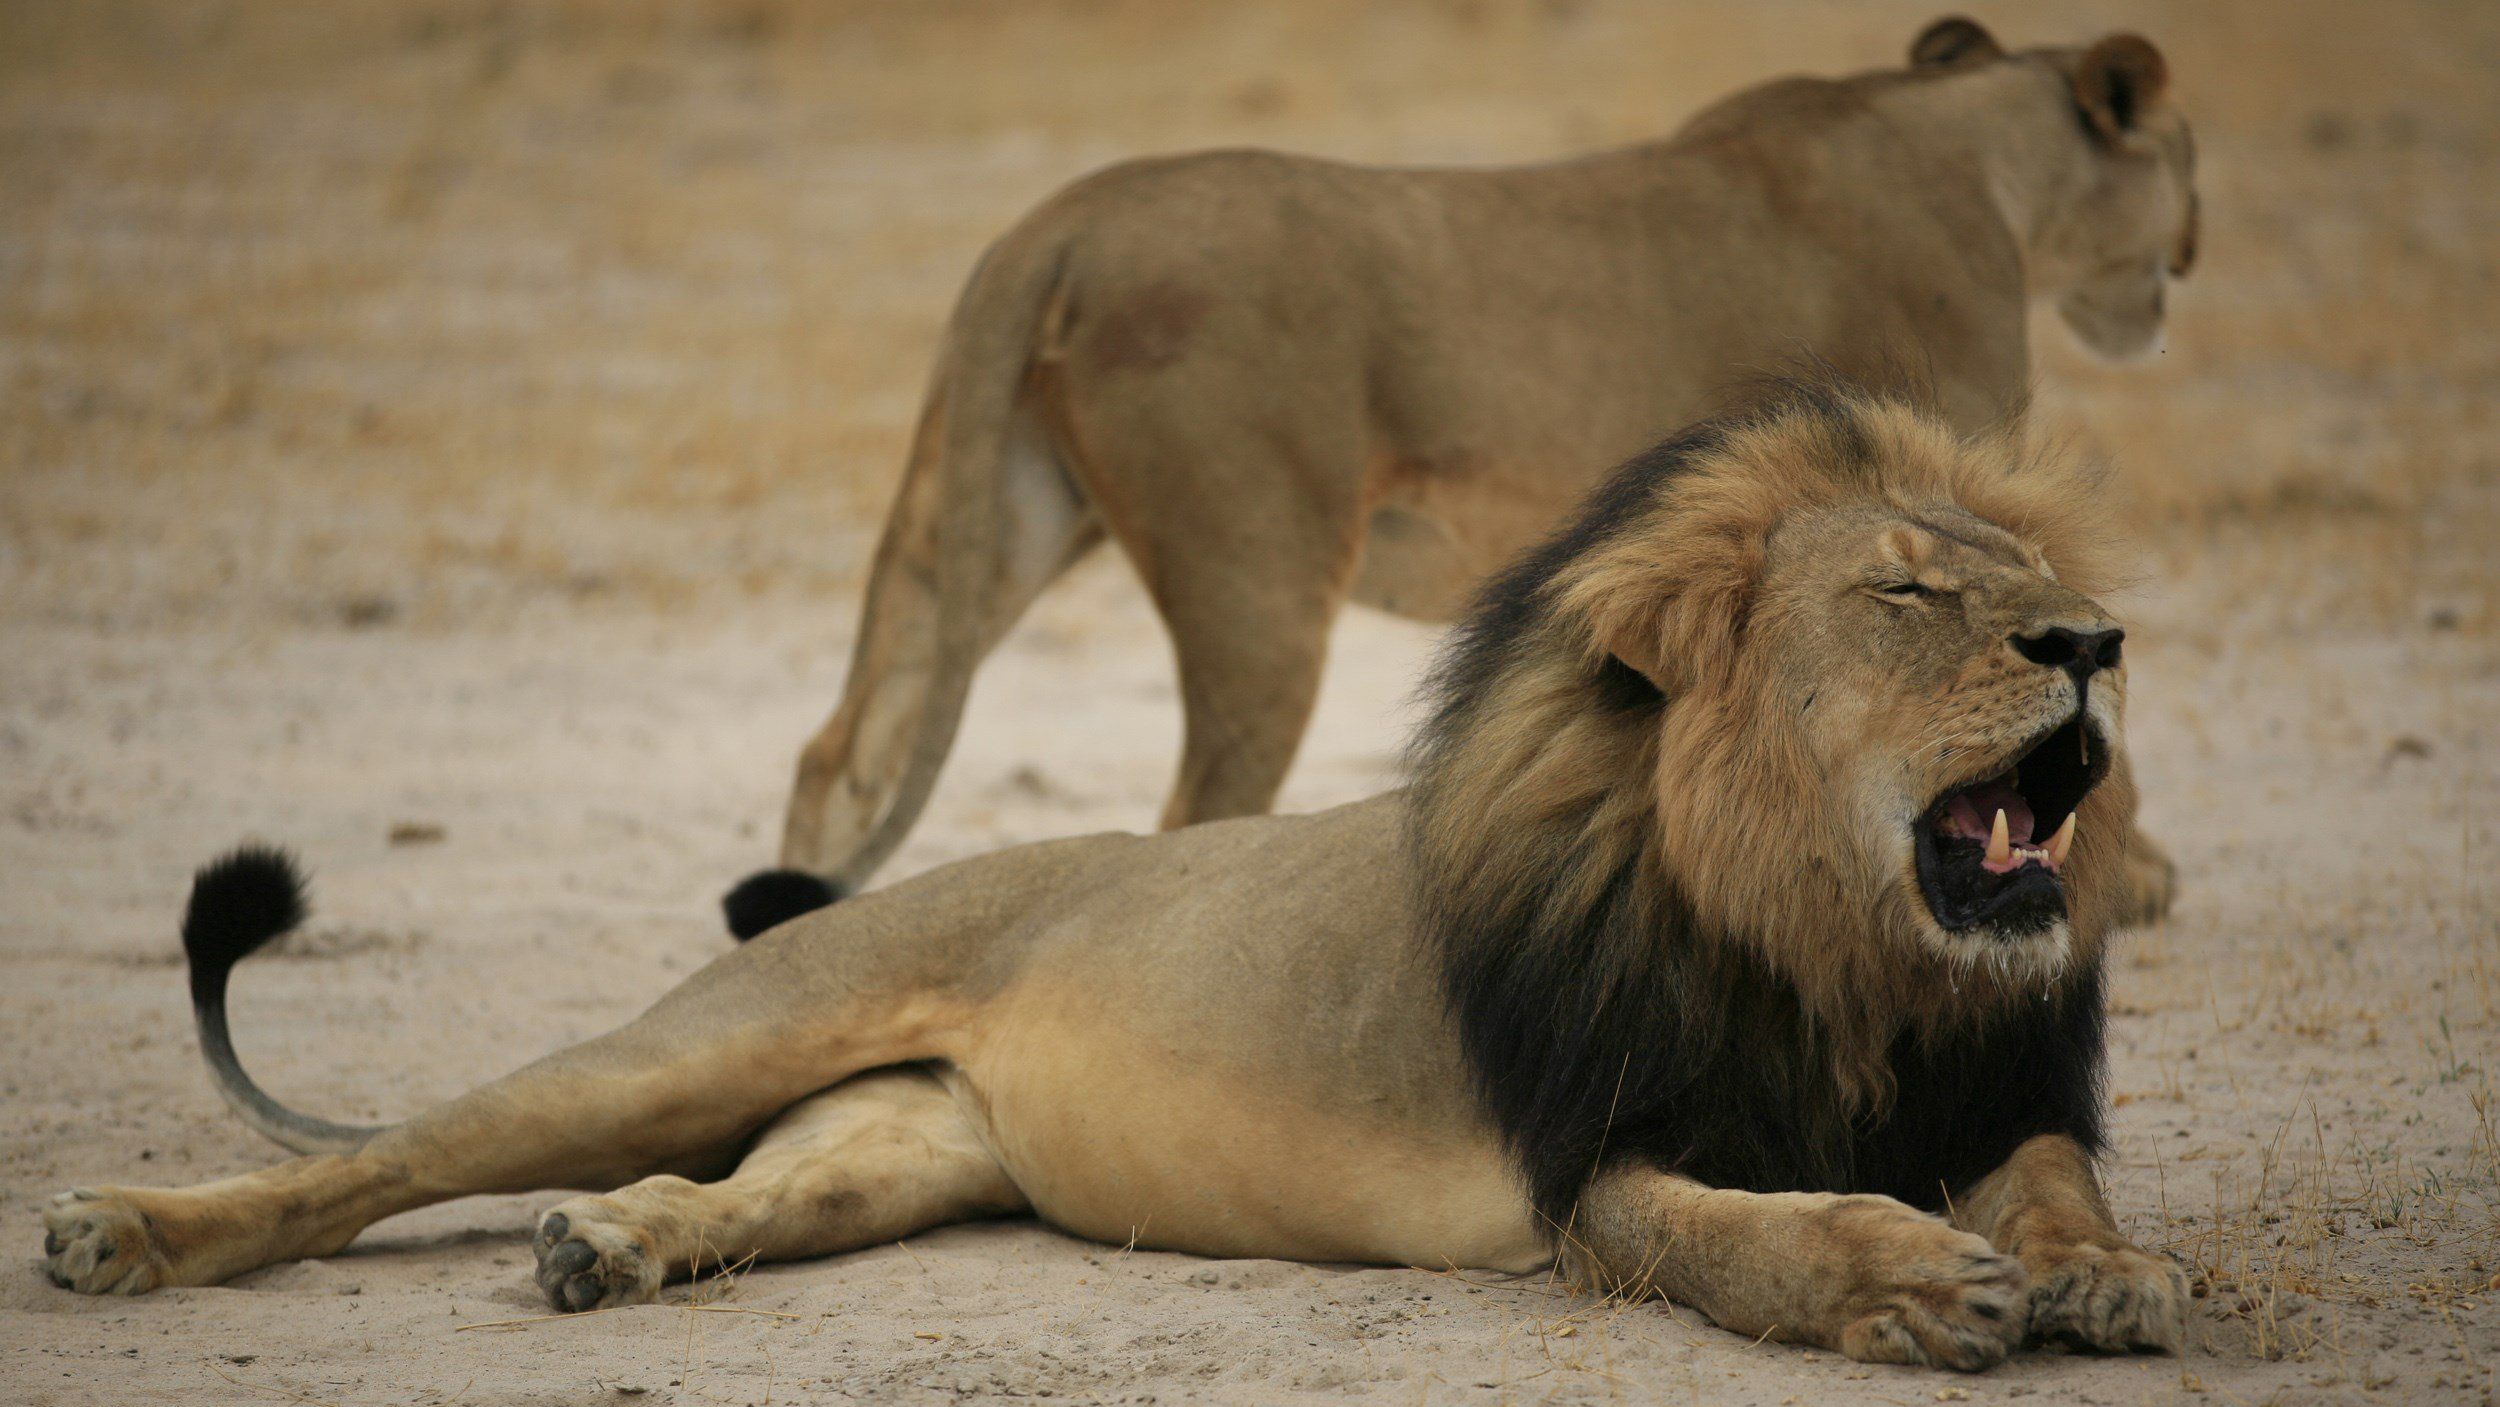 Lions roar when the weather's right, new study in Zimbabwe shows